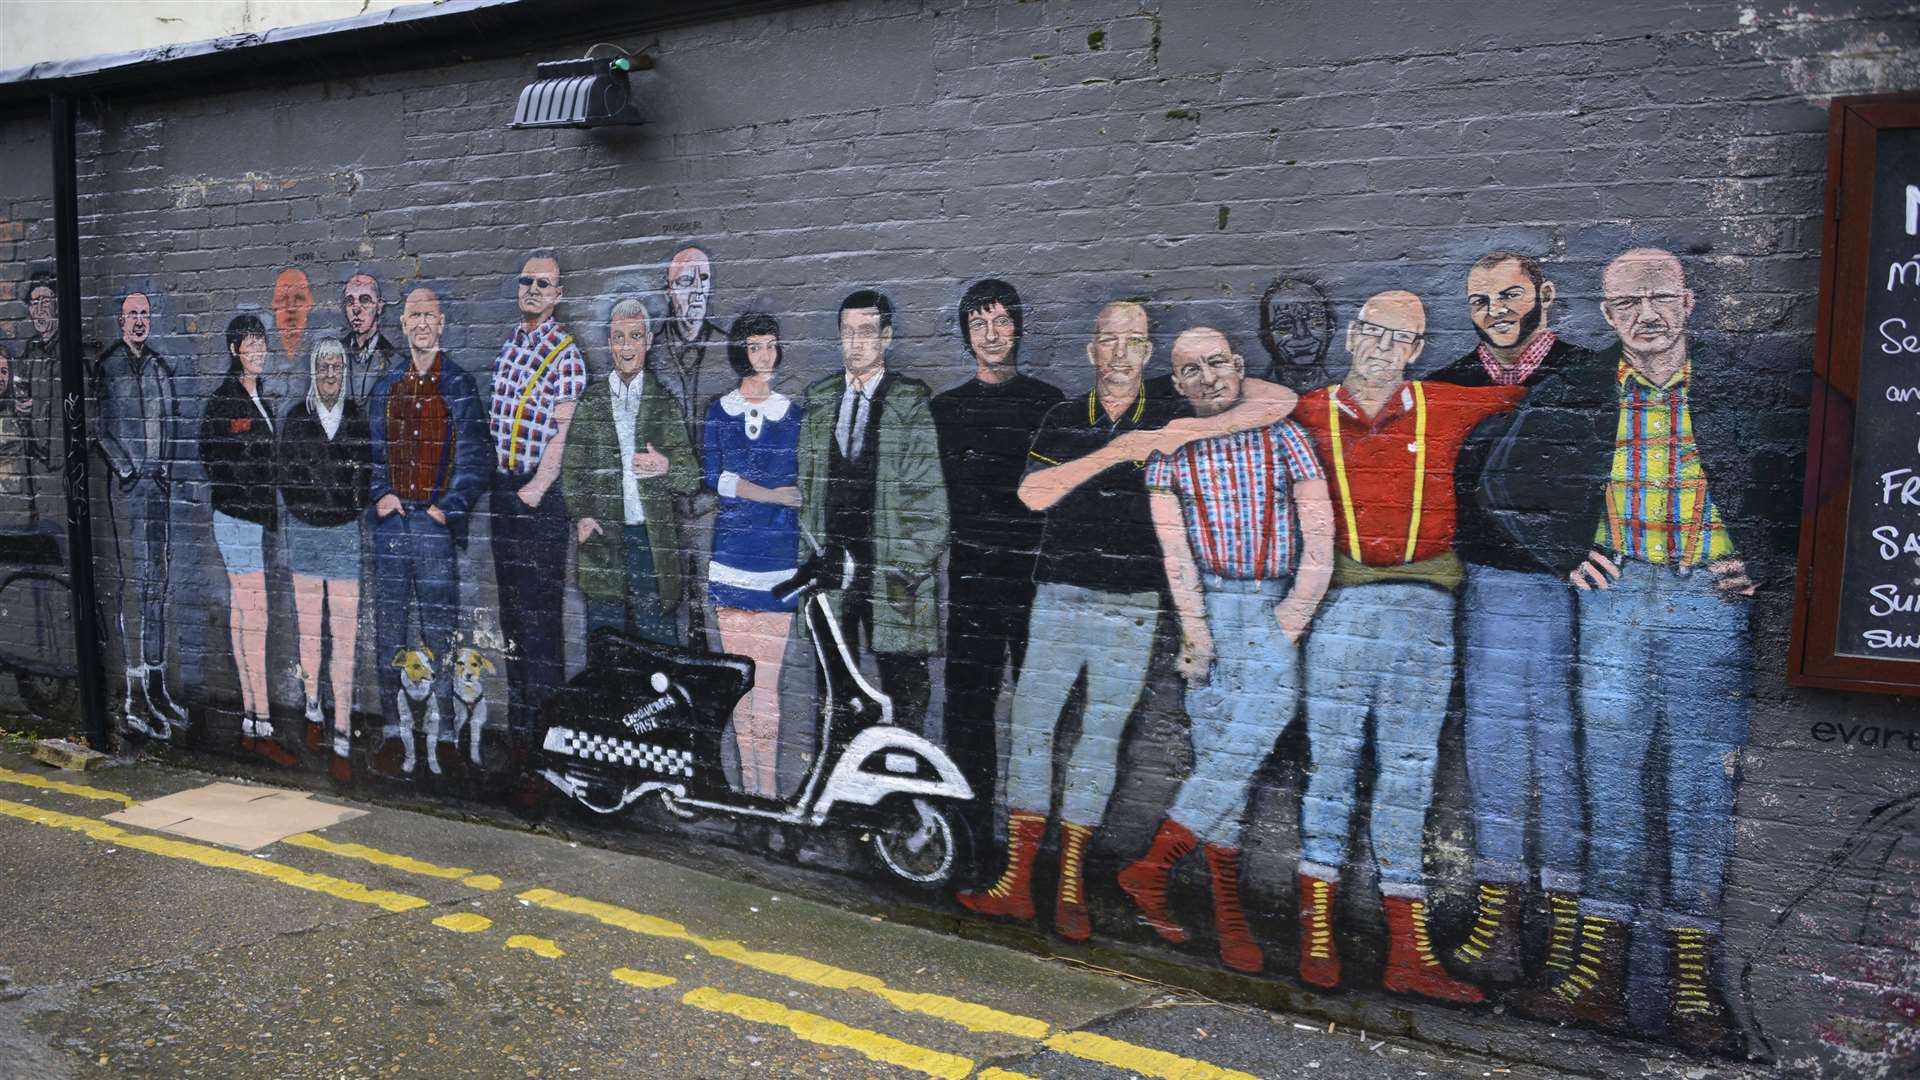 The mural in Mansion Street, Margate